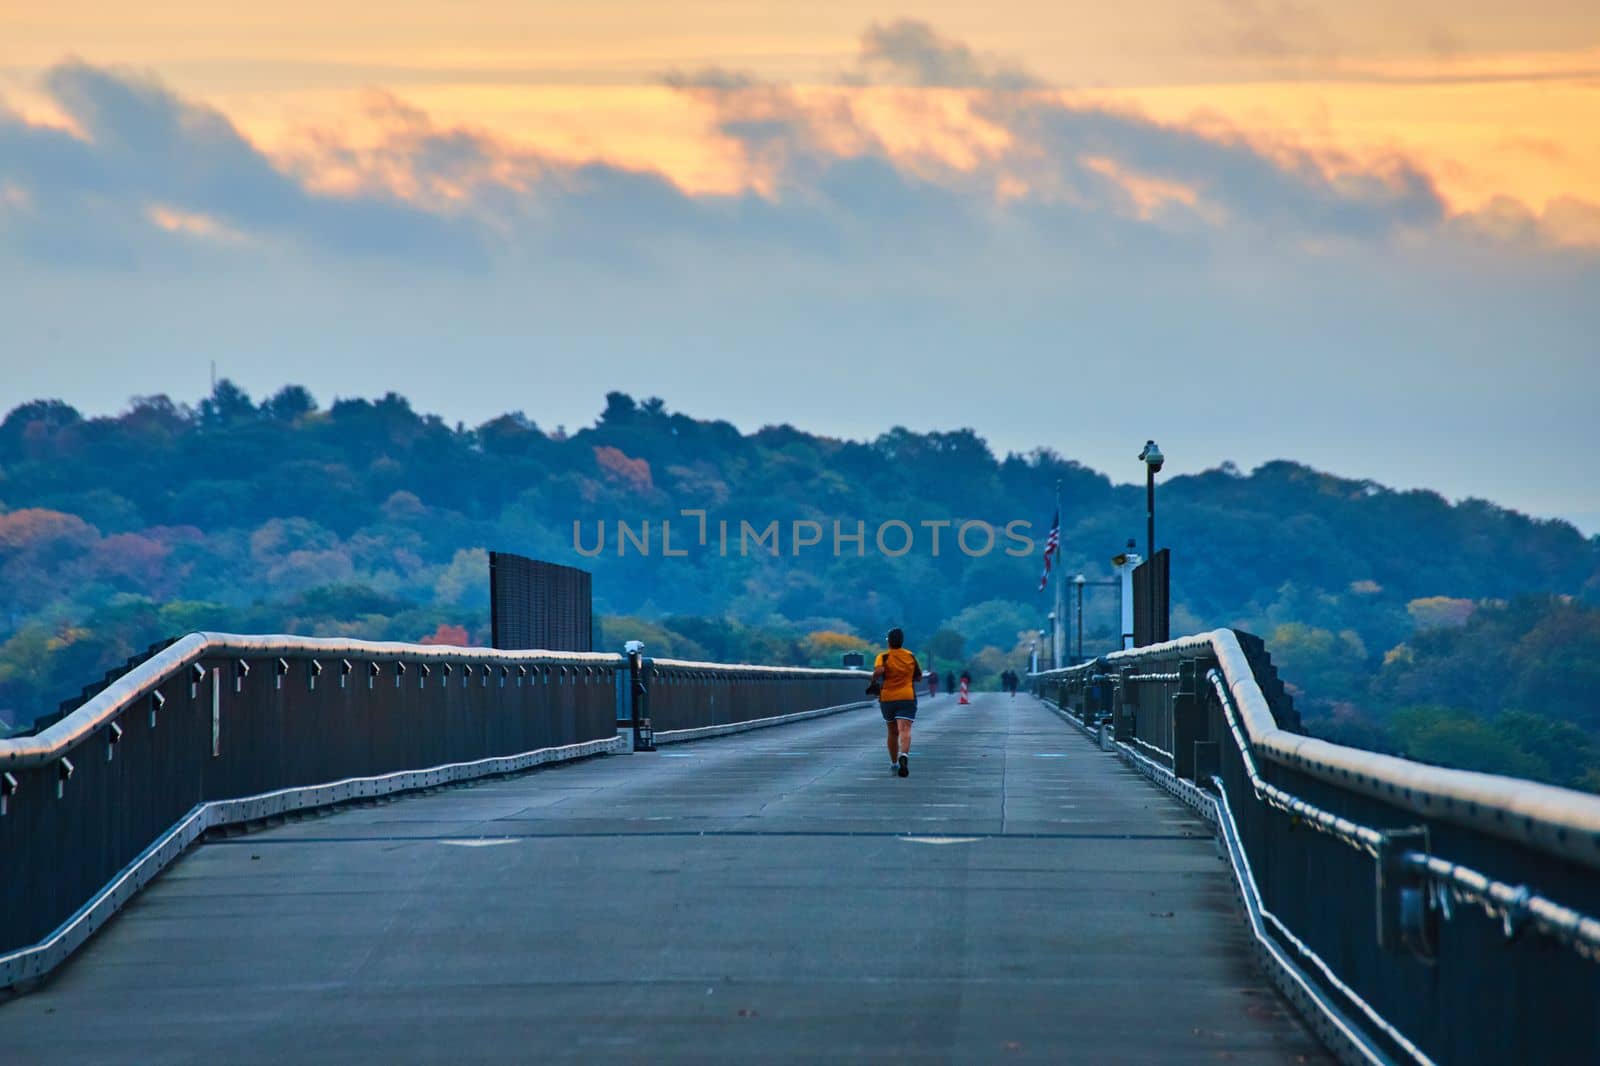 Huge cement bridge walkway with joggers during morning light by njproductions